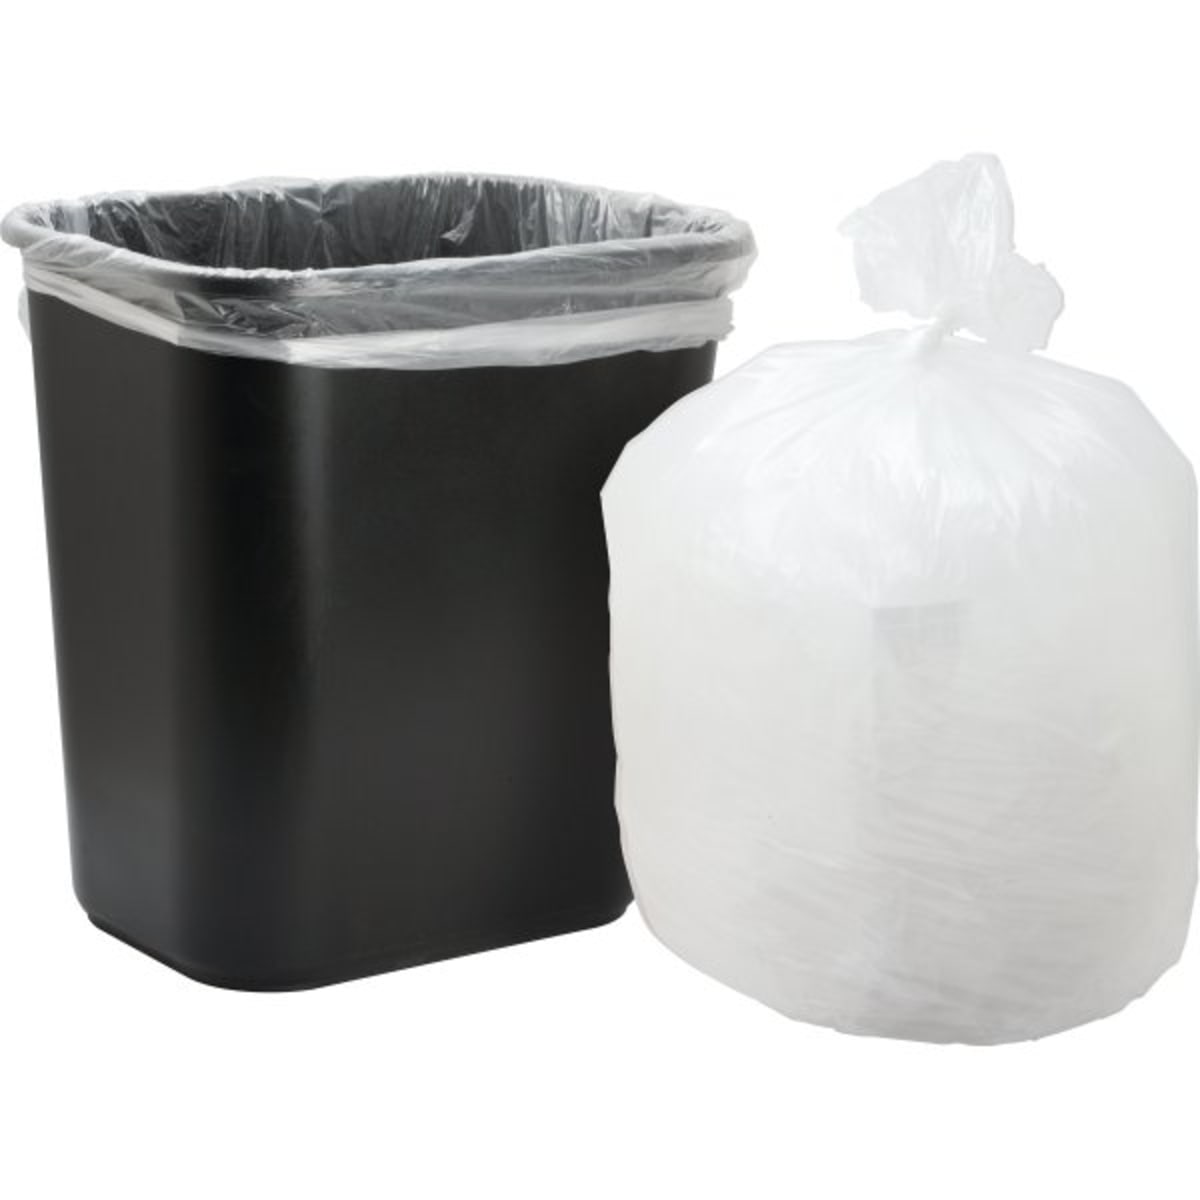 Buy 13 X 4 X 17 4 Gallon Trash Can Liner Clear 0.4 Mil